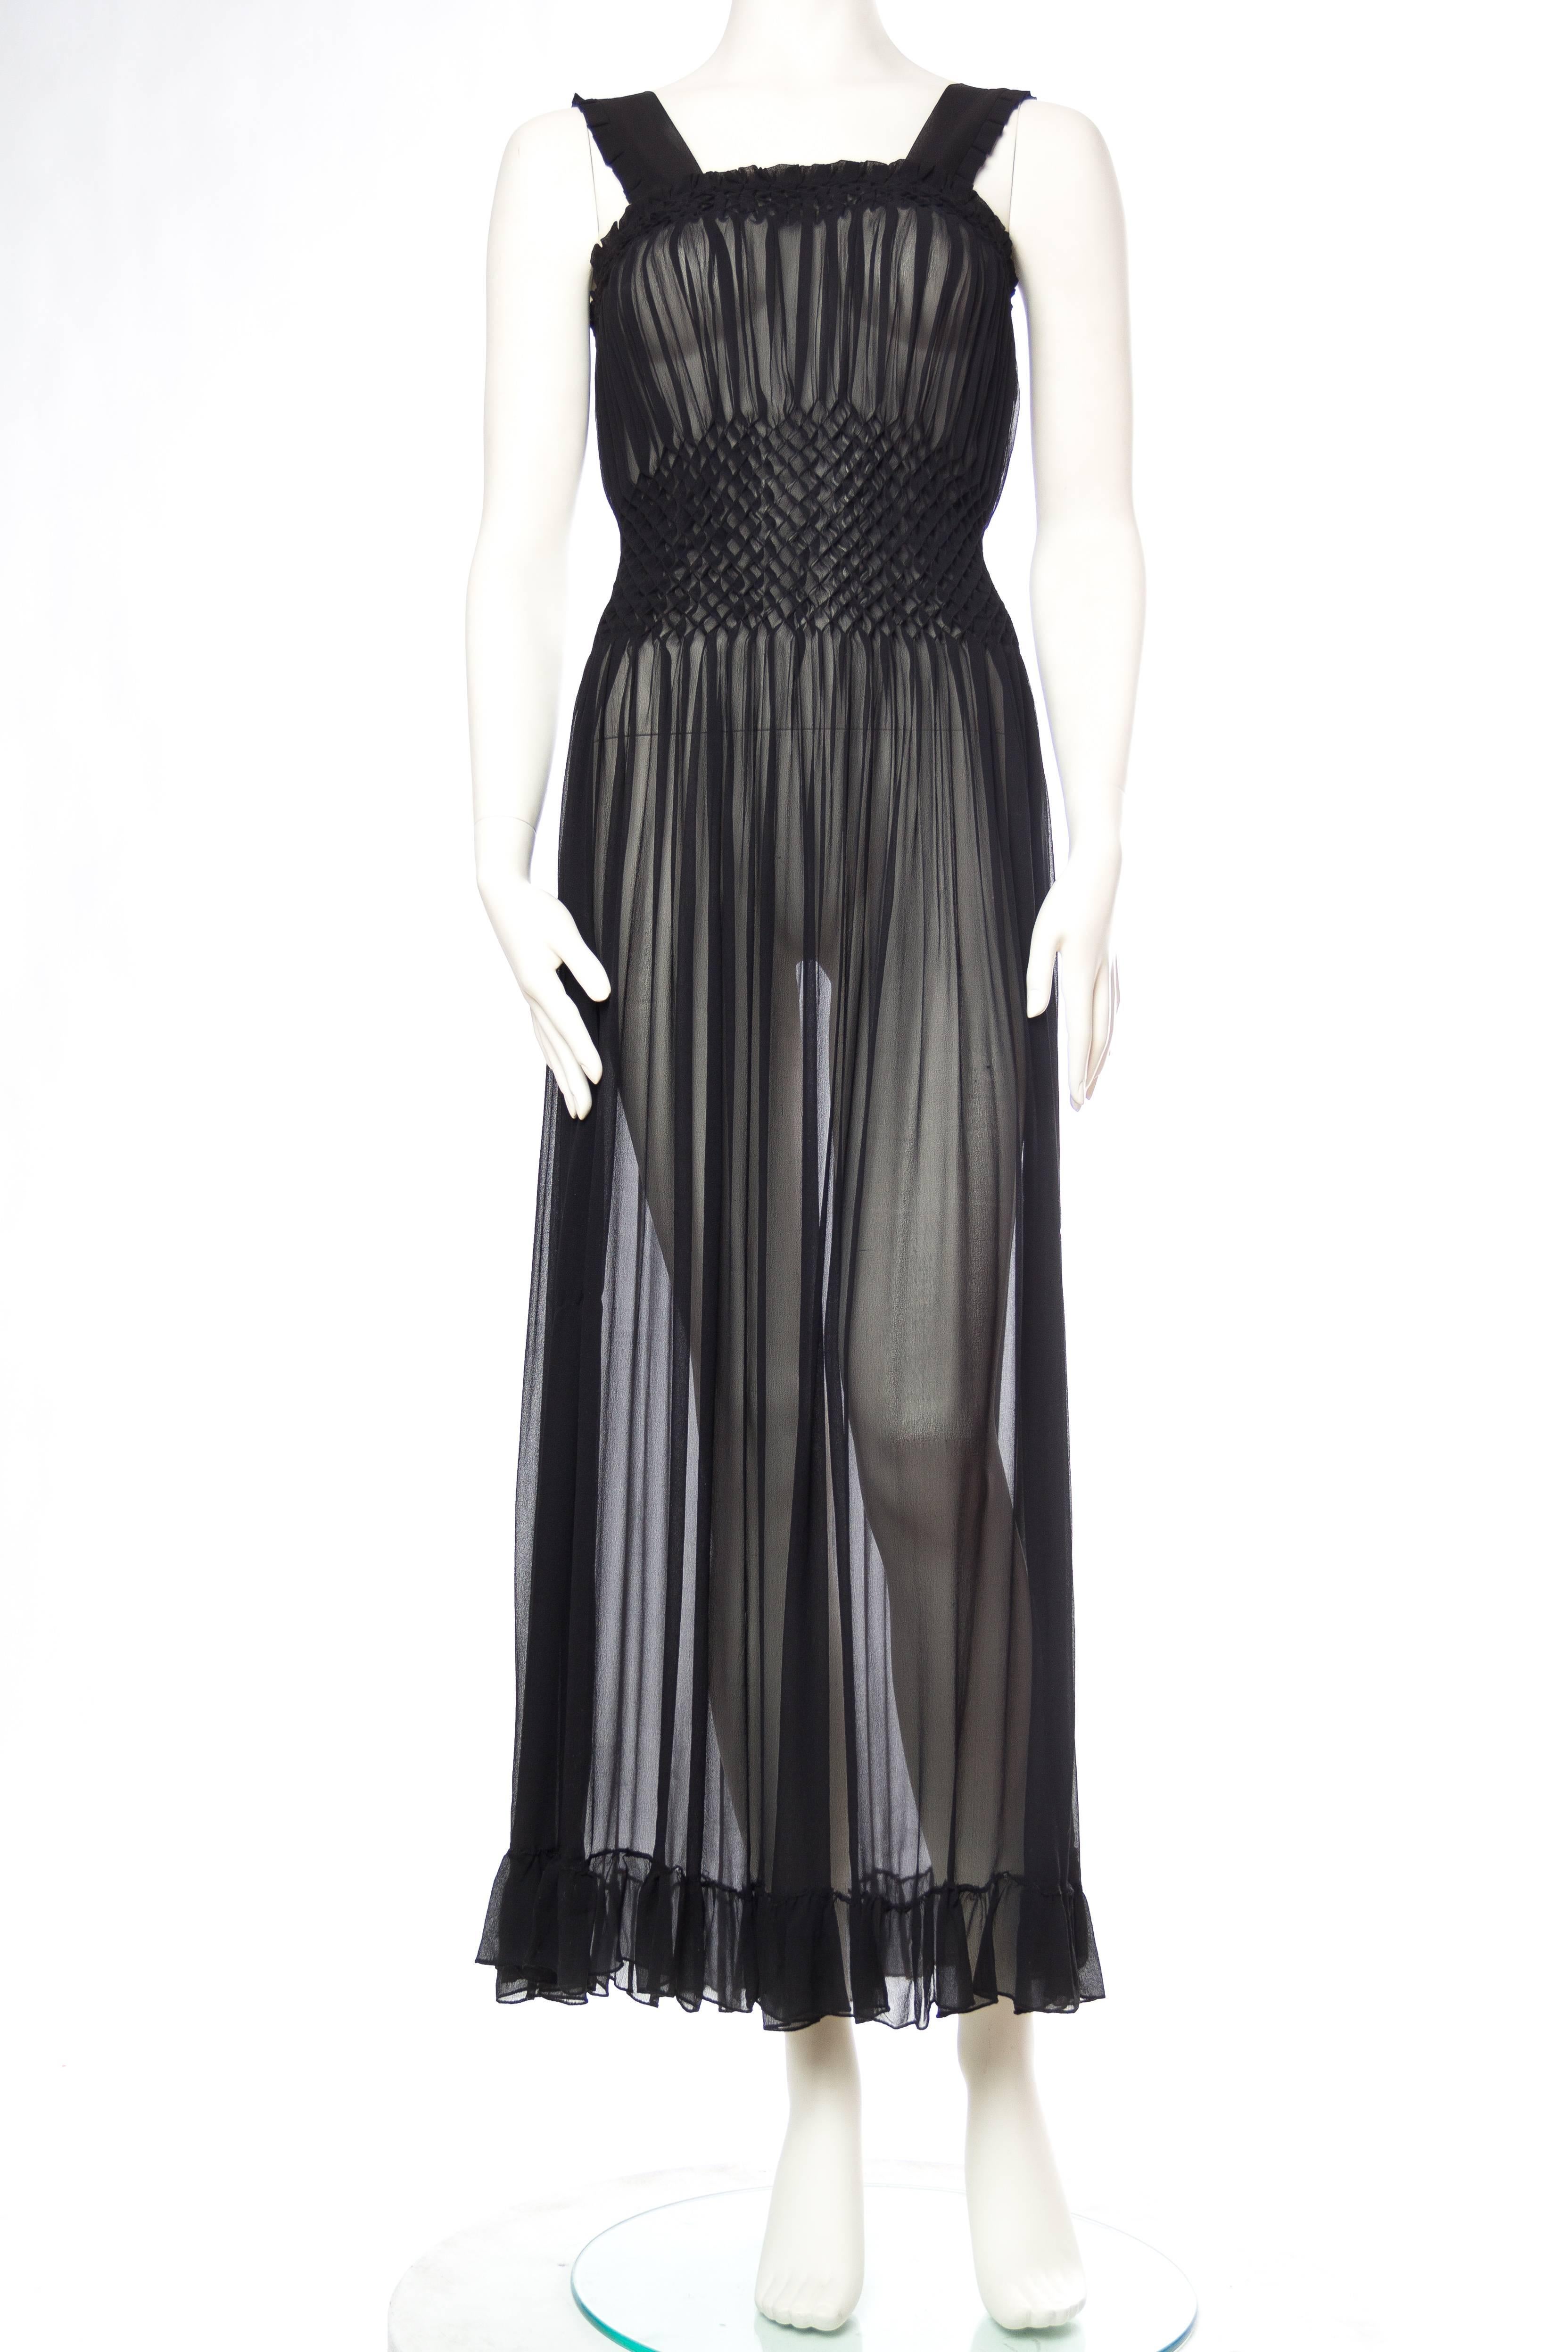 Black 1940s Sheer Chiffon Negligee with Couture Detailing